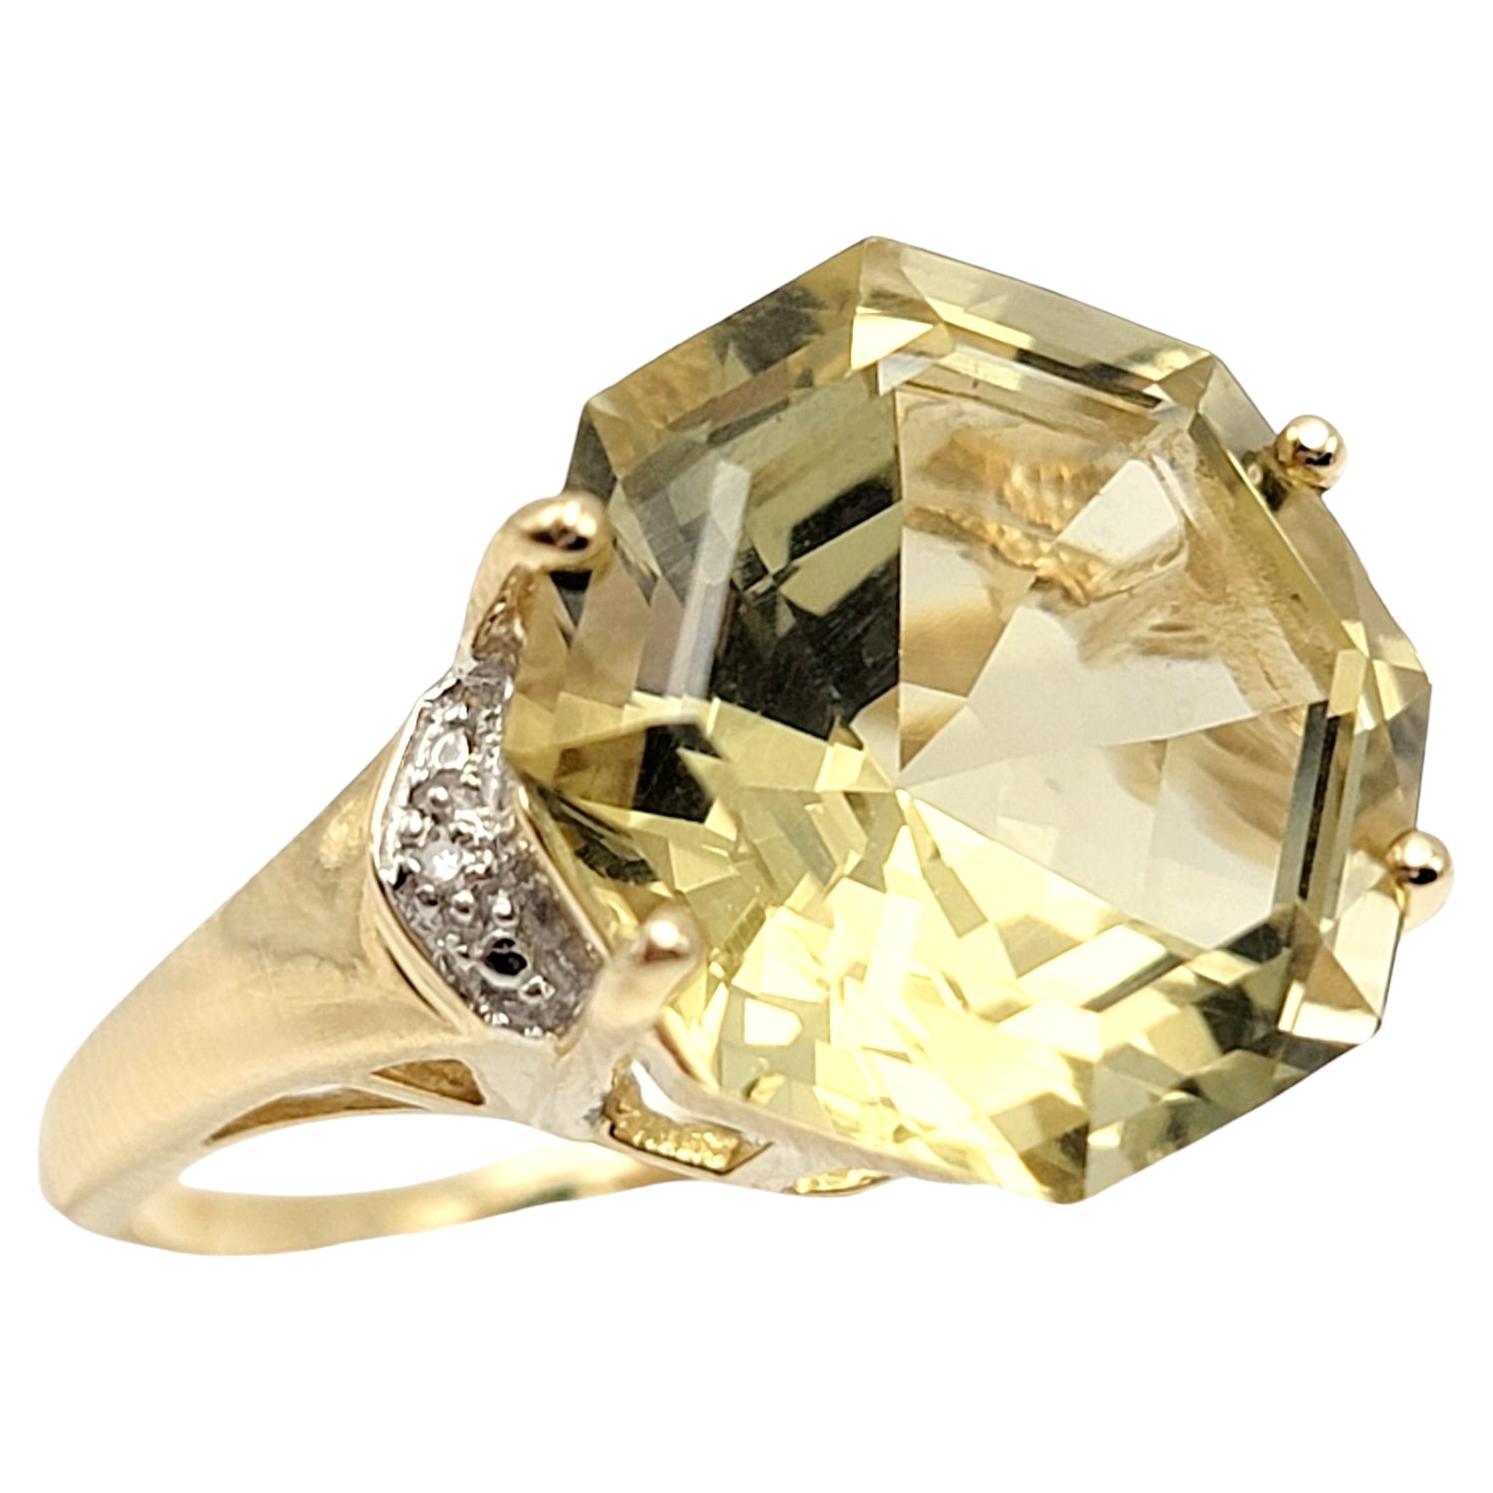 11.55 Carat Octagonal Cut Citrine Solitaire Cocktail Ring with Diamond Accents